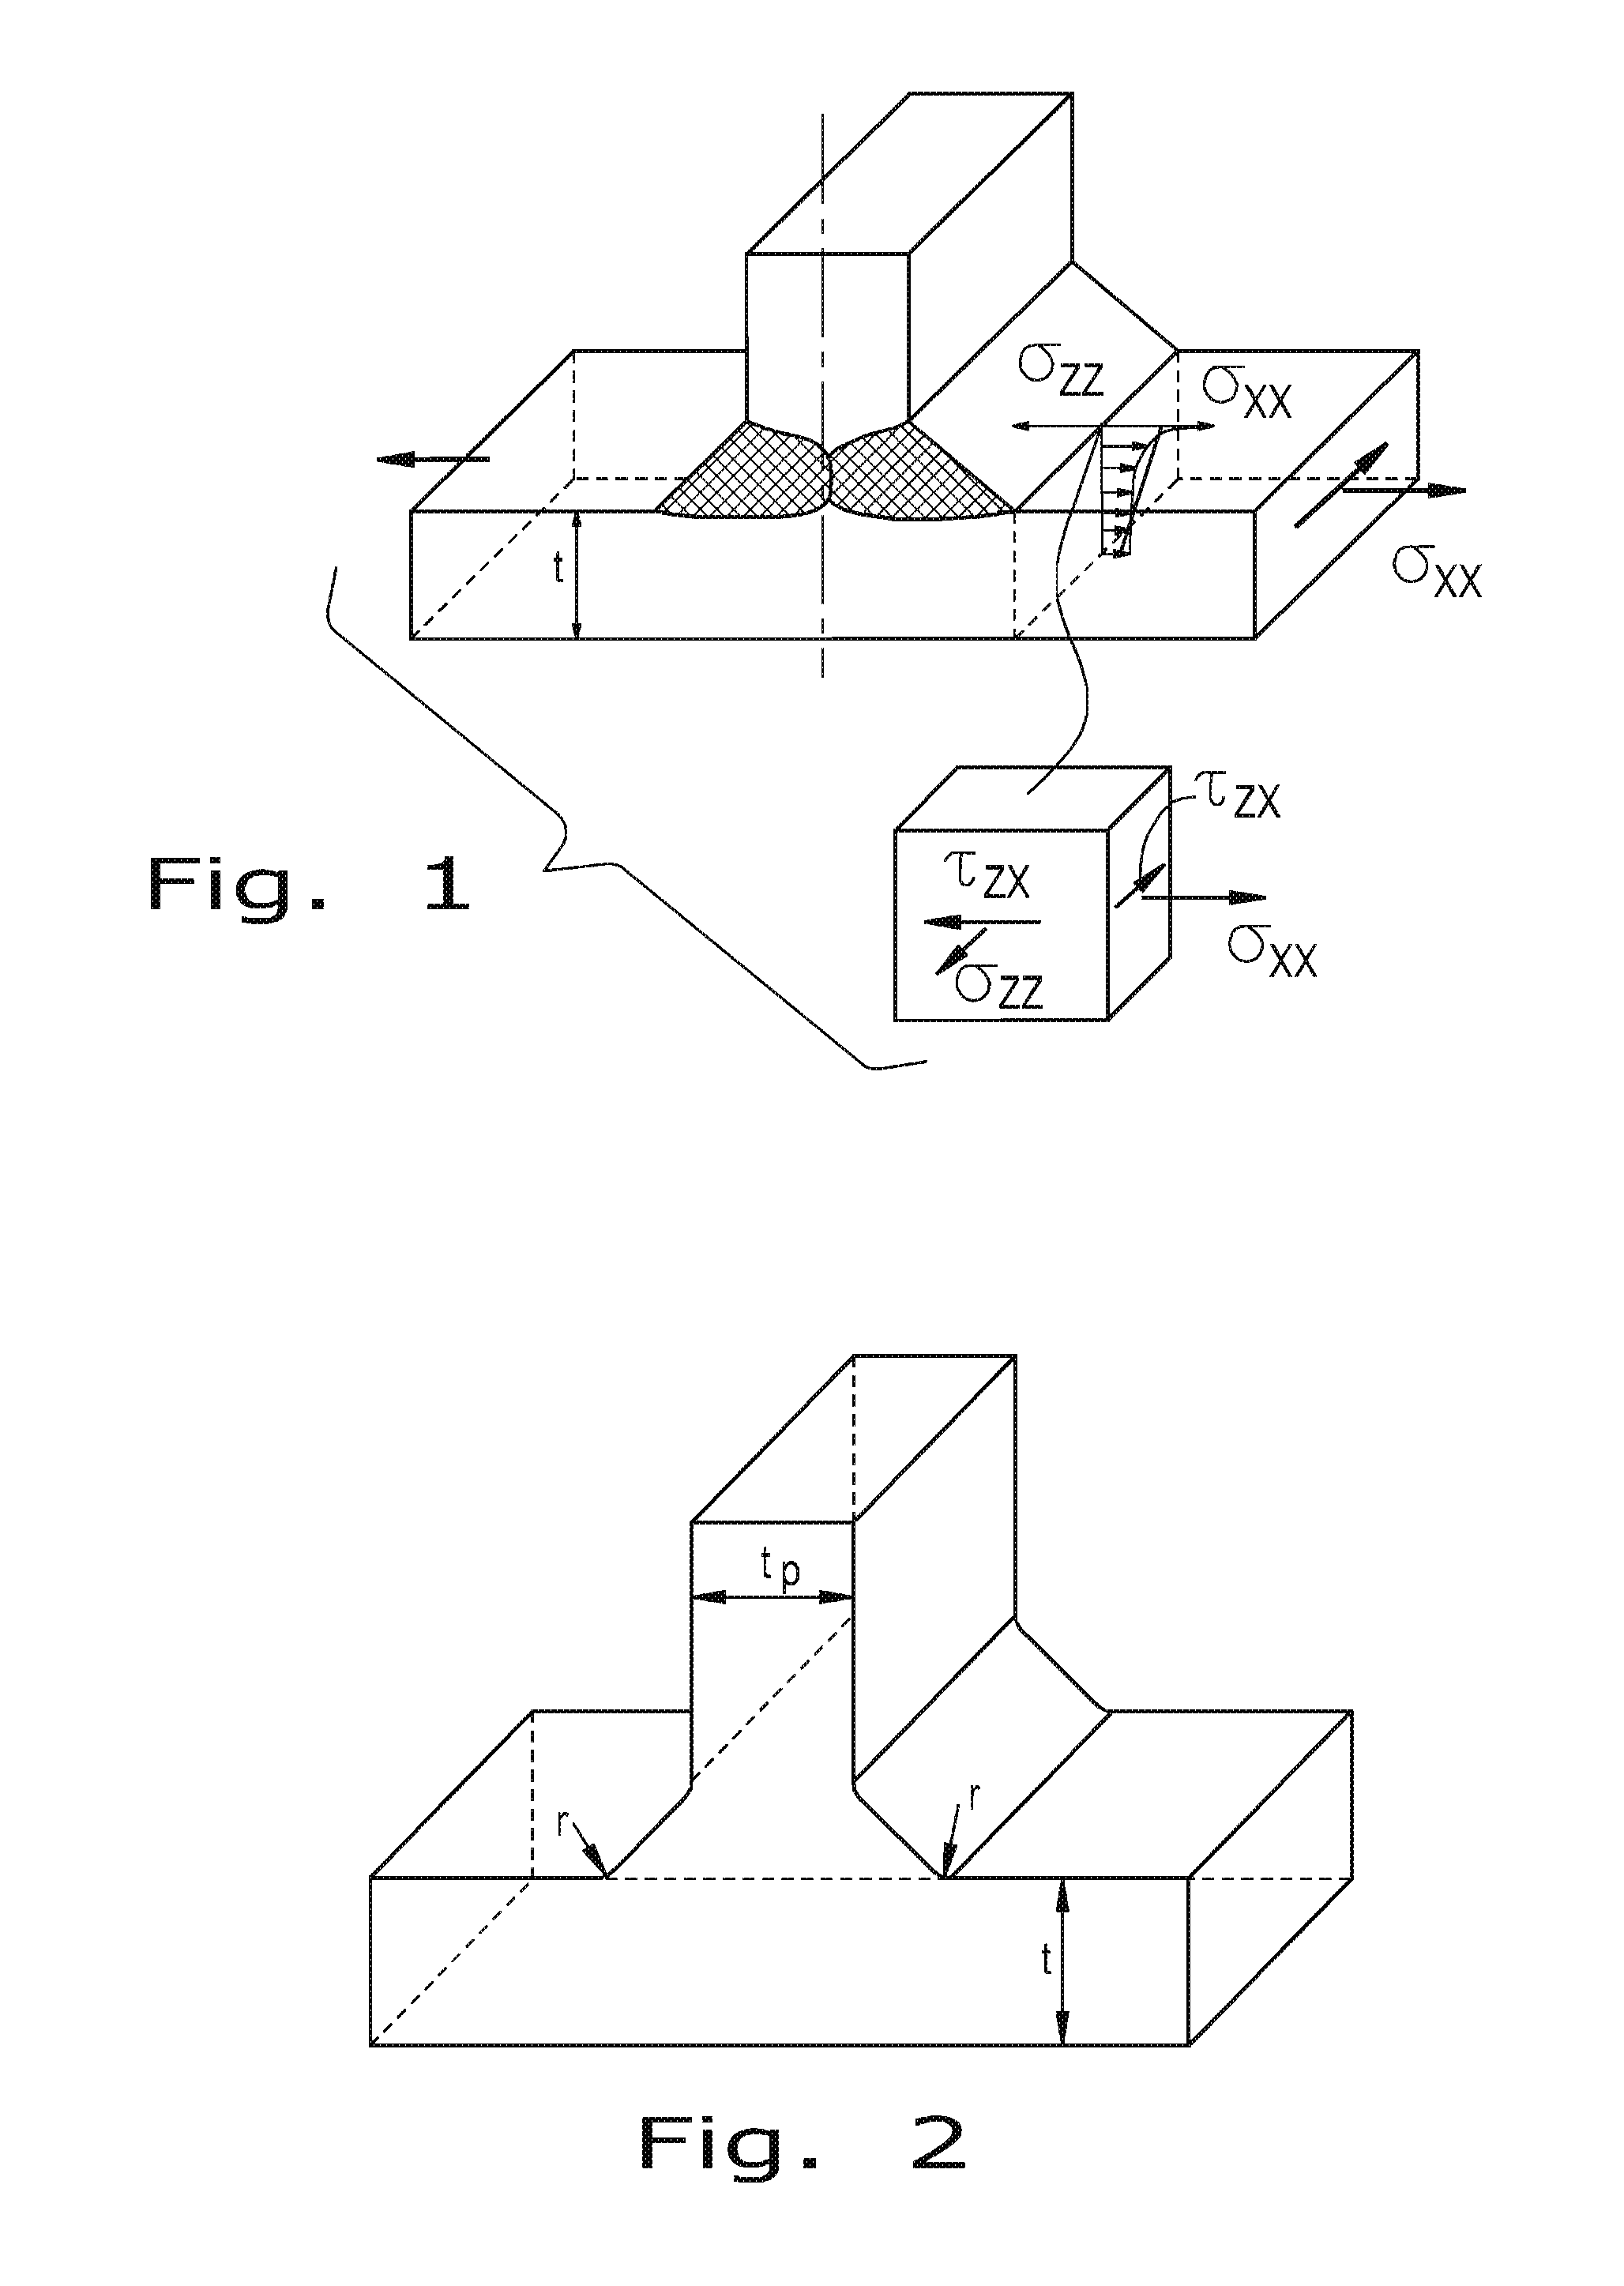 Method for the prediction of fatigue life for welded structures